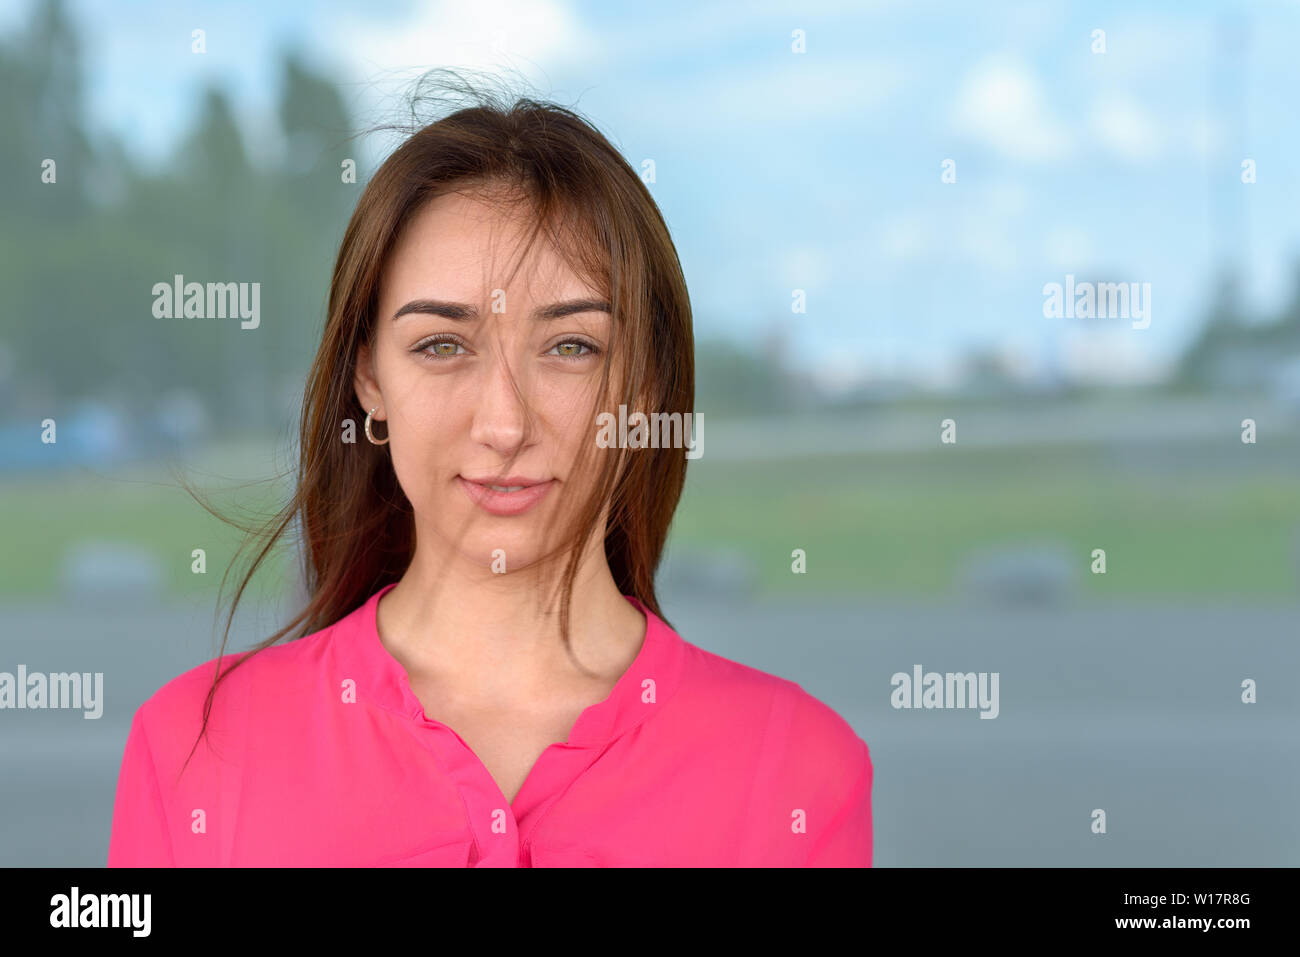 Attractive natural young woman with wisps of hair falling across her face posing in front of a large window looking at the camera with a quiet friendl Stock Photo